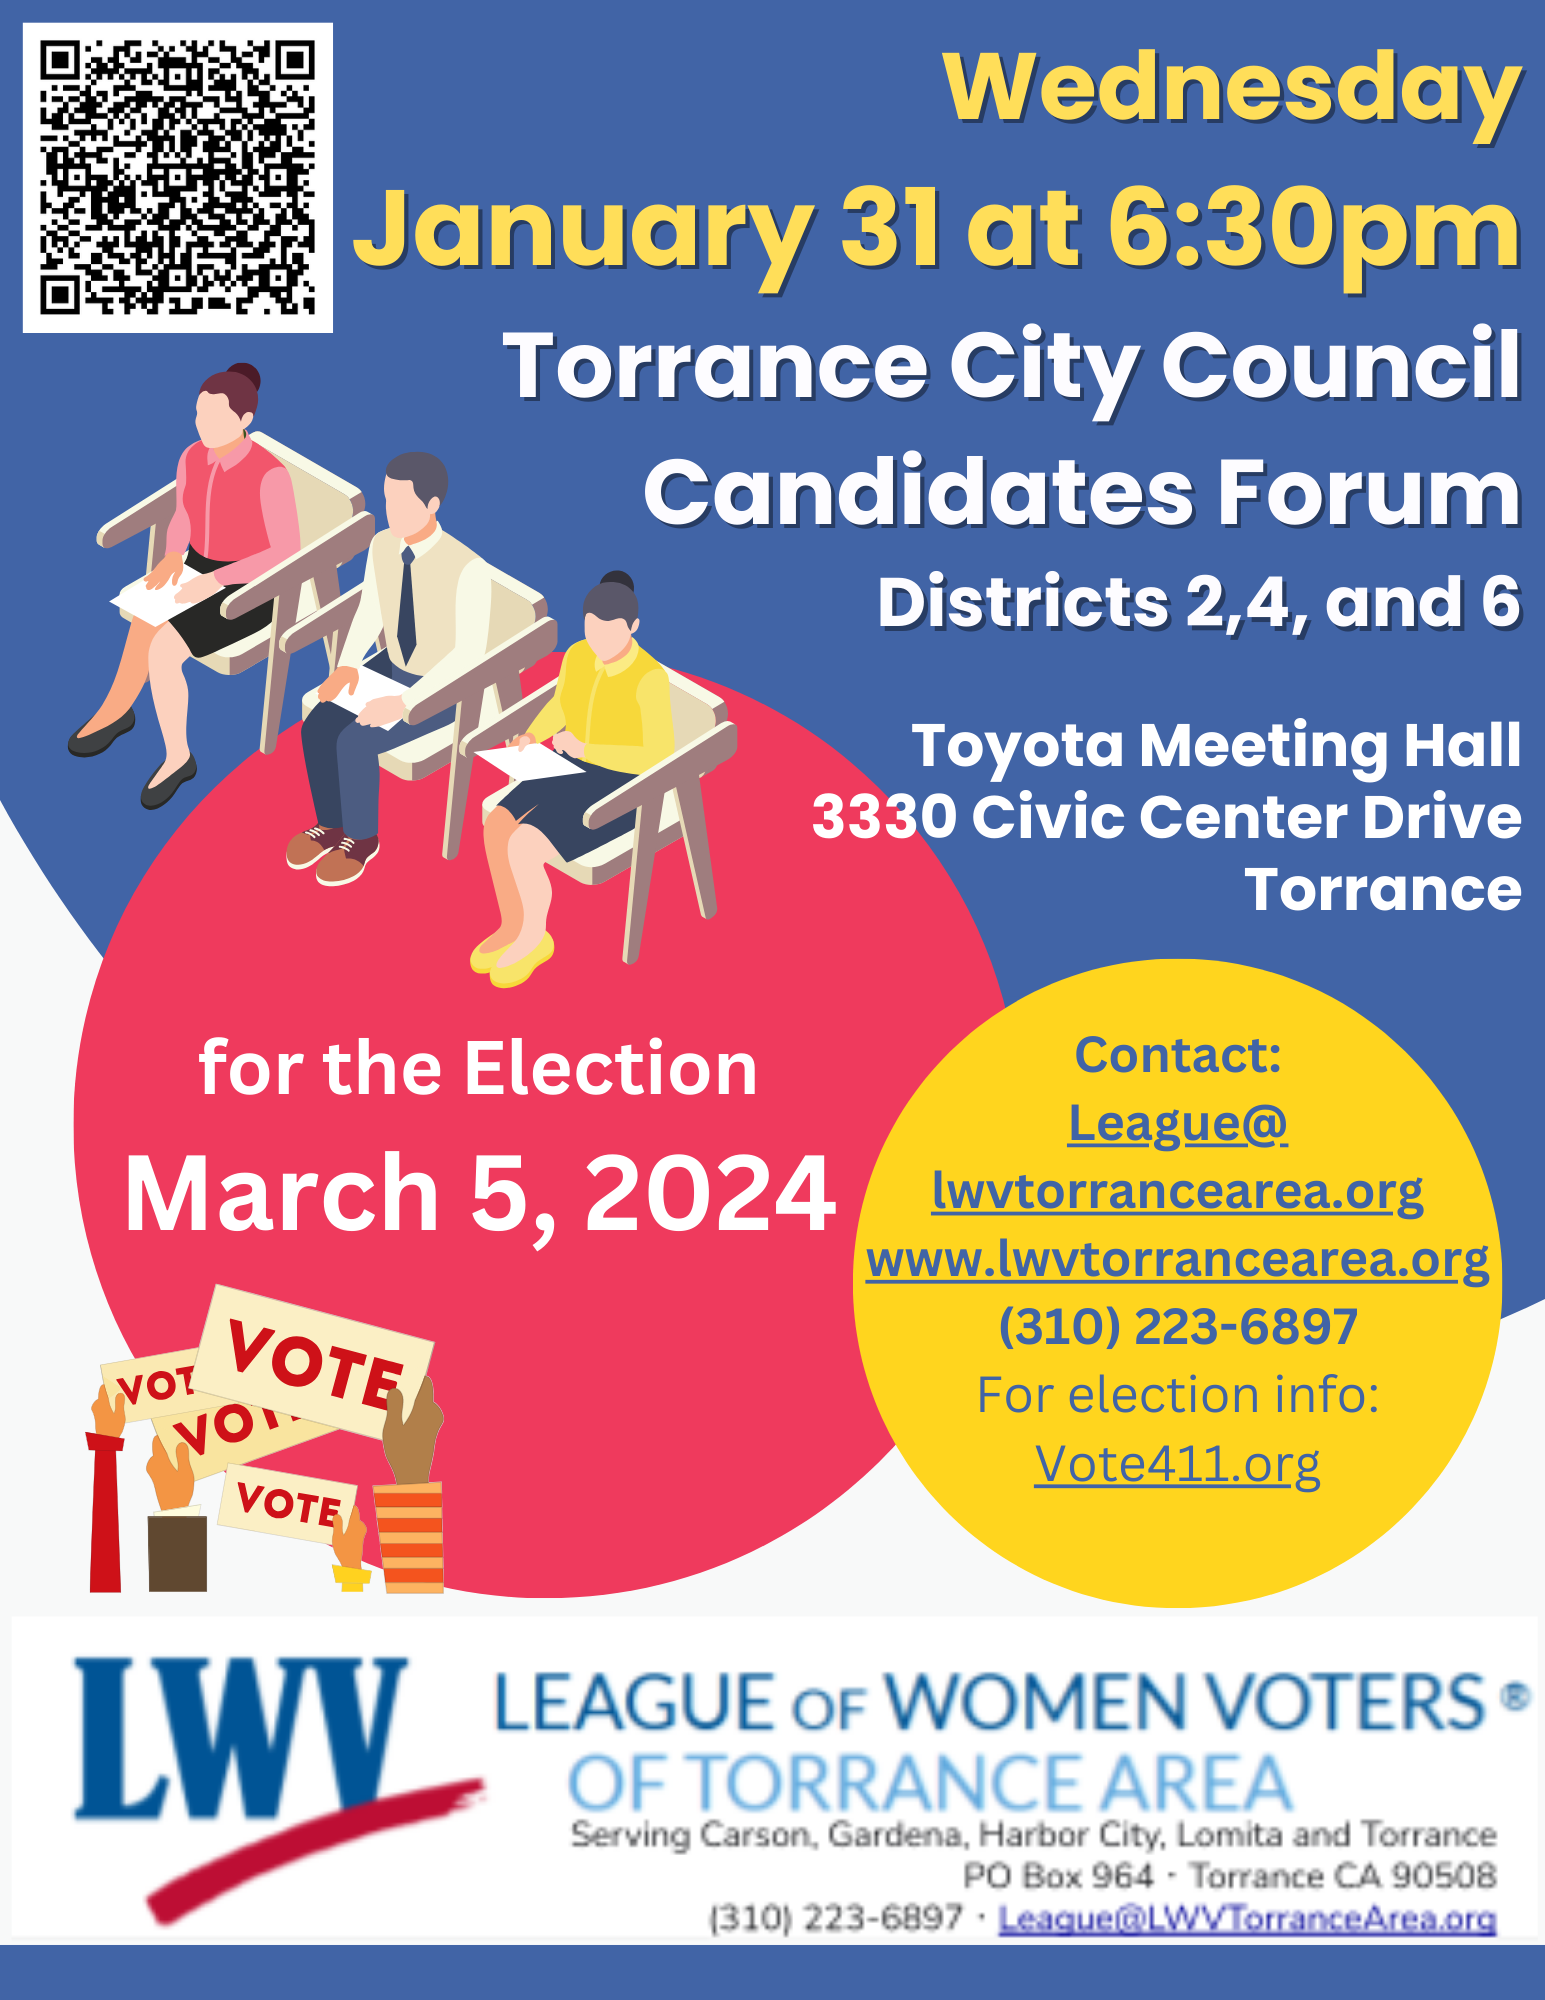 Torrance City Council Candidate Forum January 31